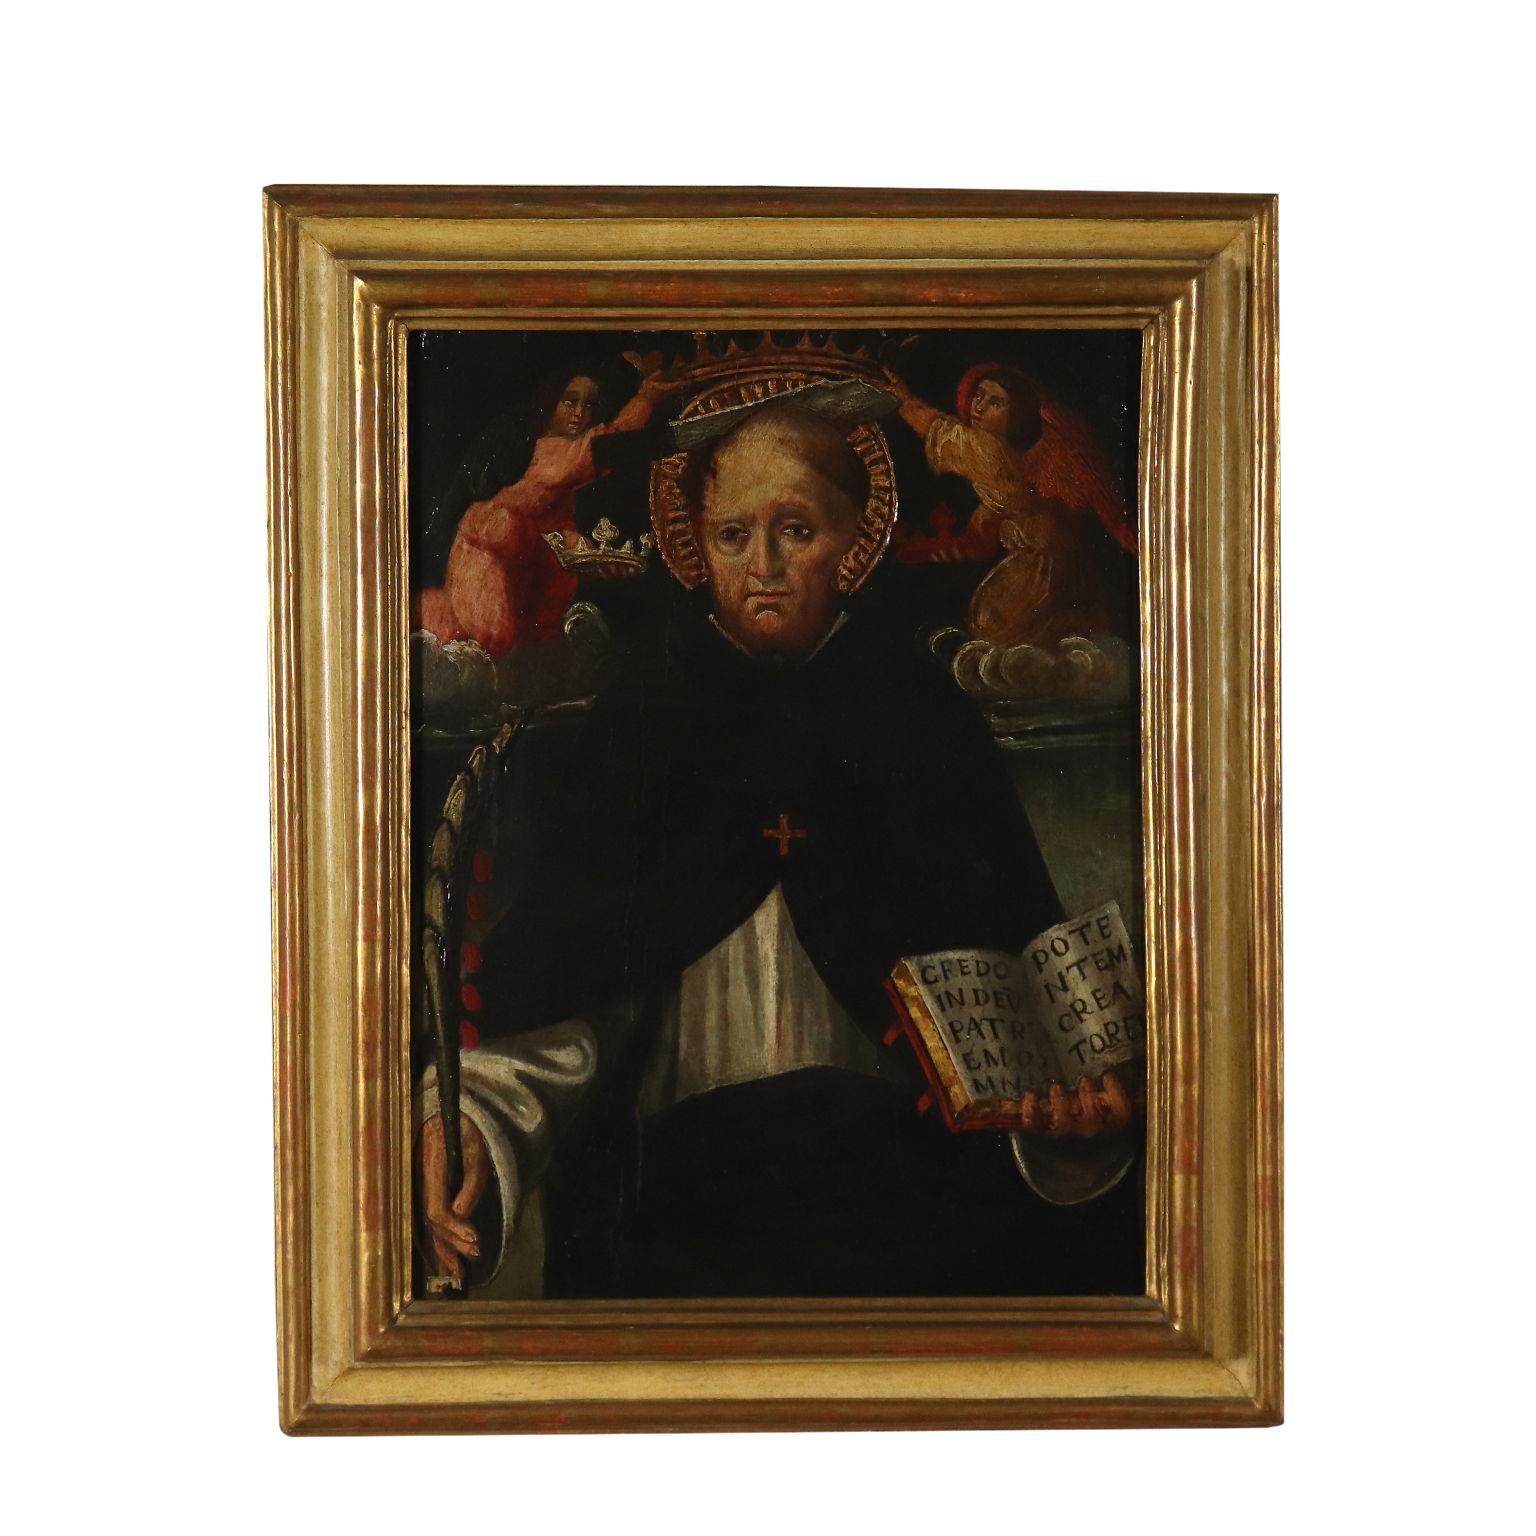 Unknown Portrait Painting - St. Peter the Martyr Oil Painting 16th Century